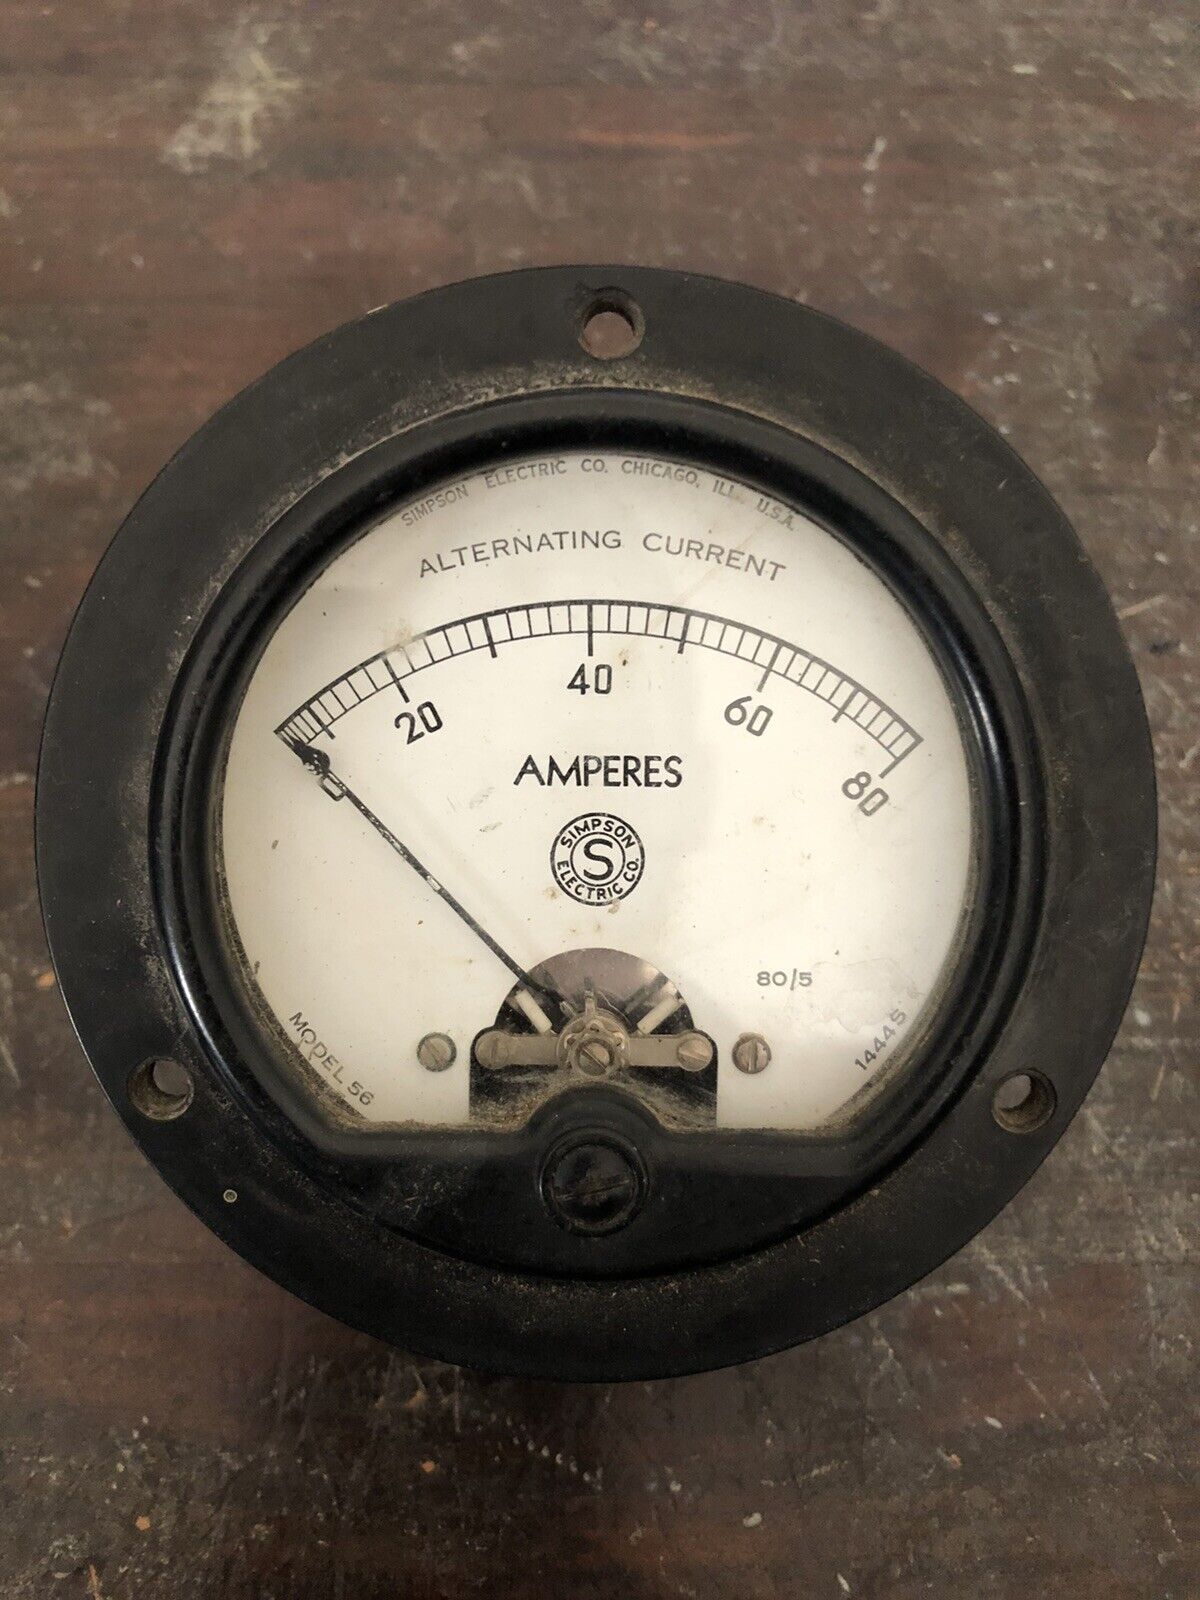 Simpson Model 56 Alternating Current Amperes Gauge UNTESTED As Is